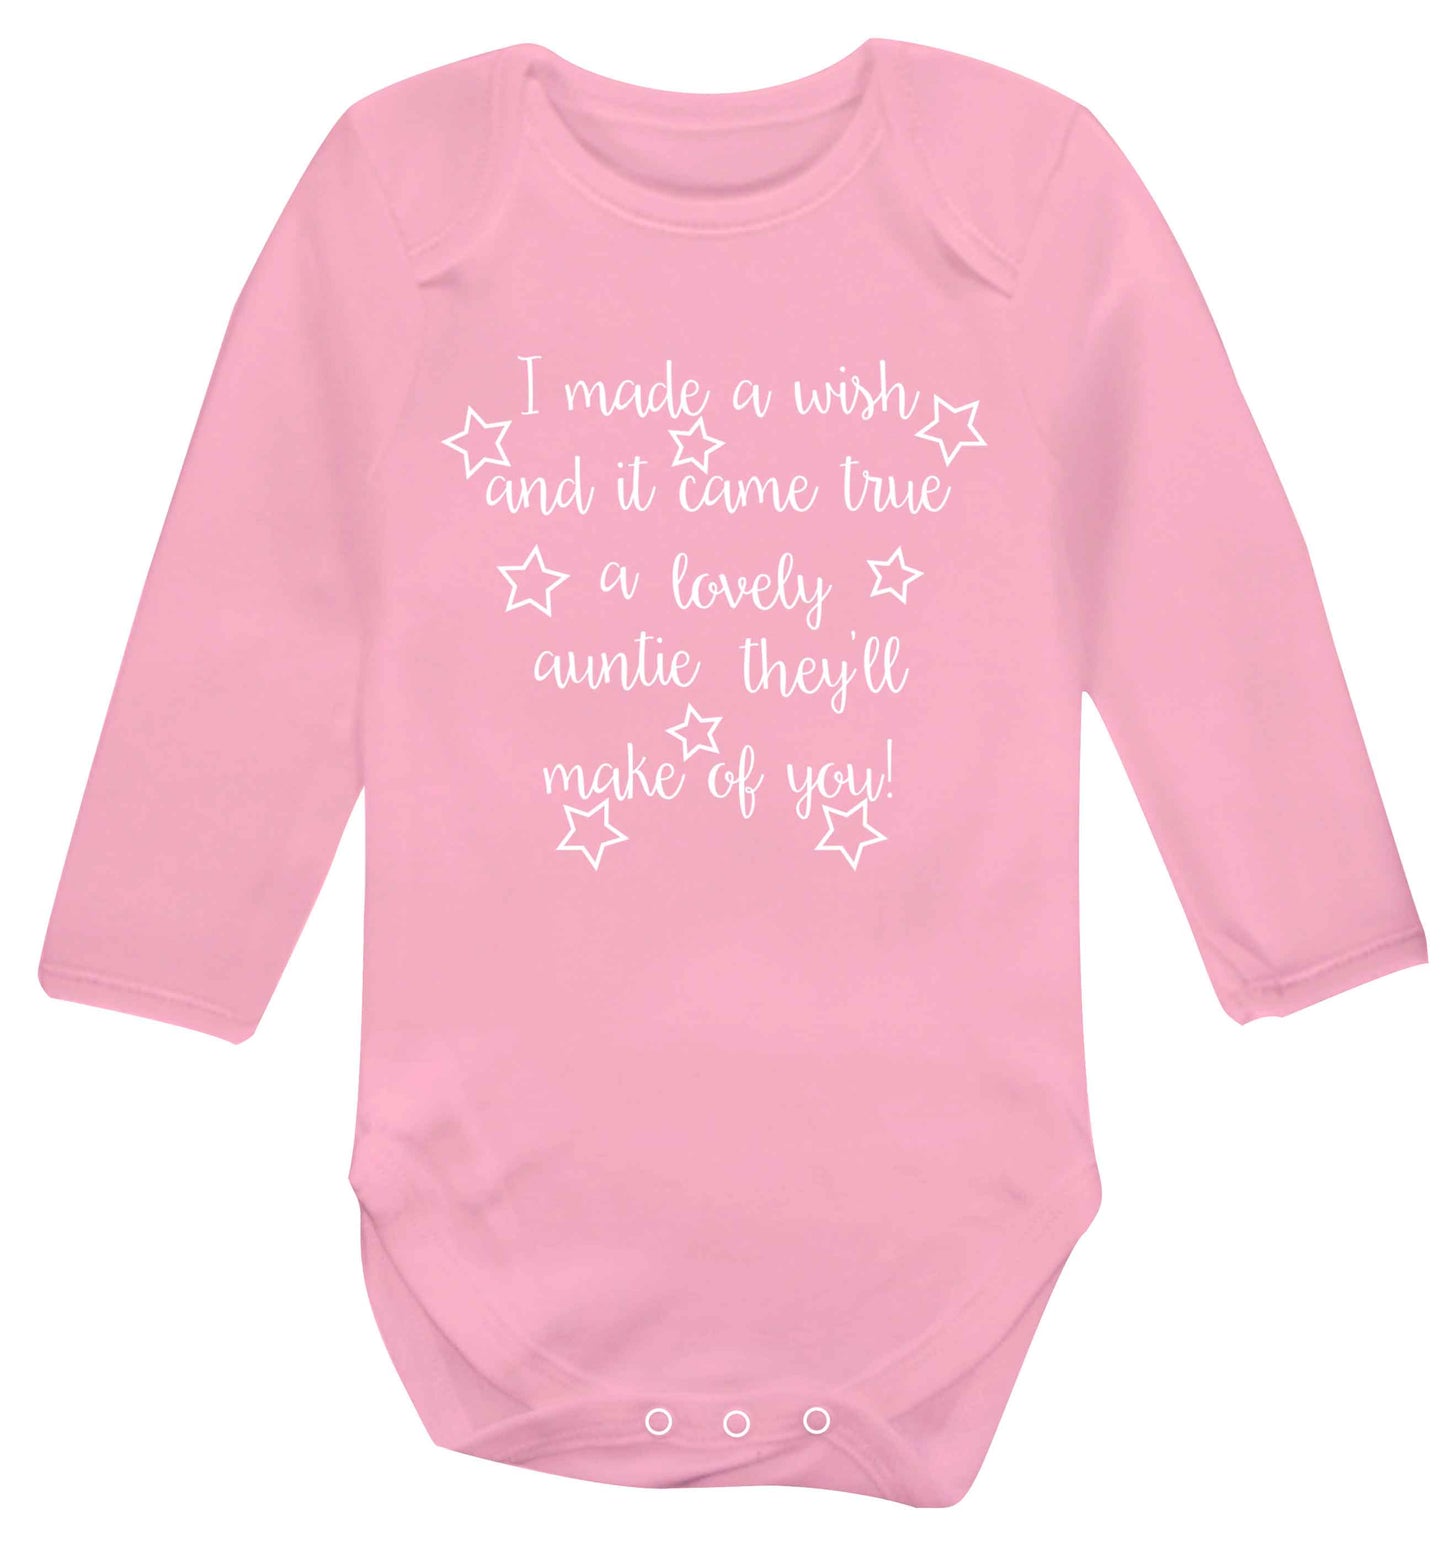 I made a wish and it came true a lovely auntie they'll make of you! Baby Vest long sleeved pale pink 6-12 months